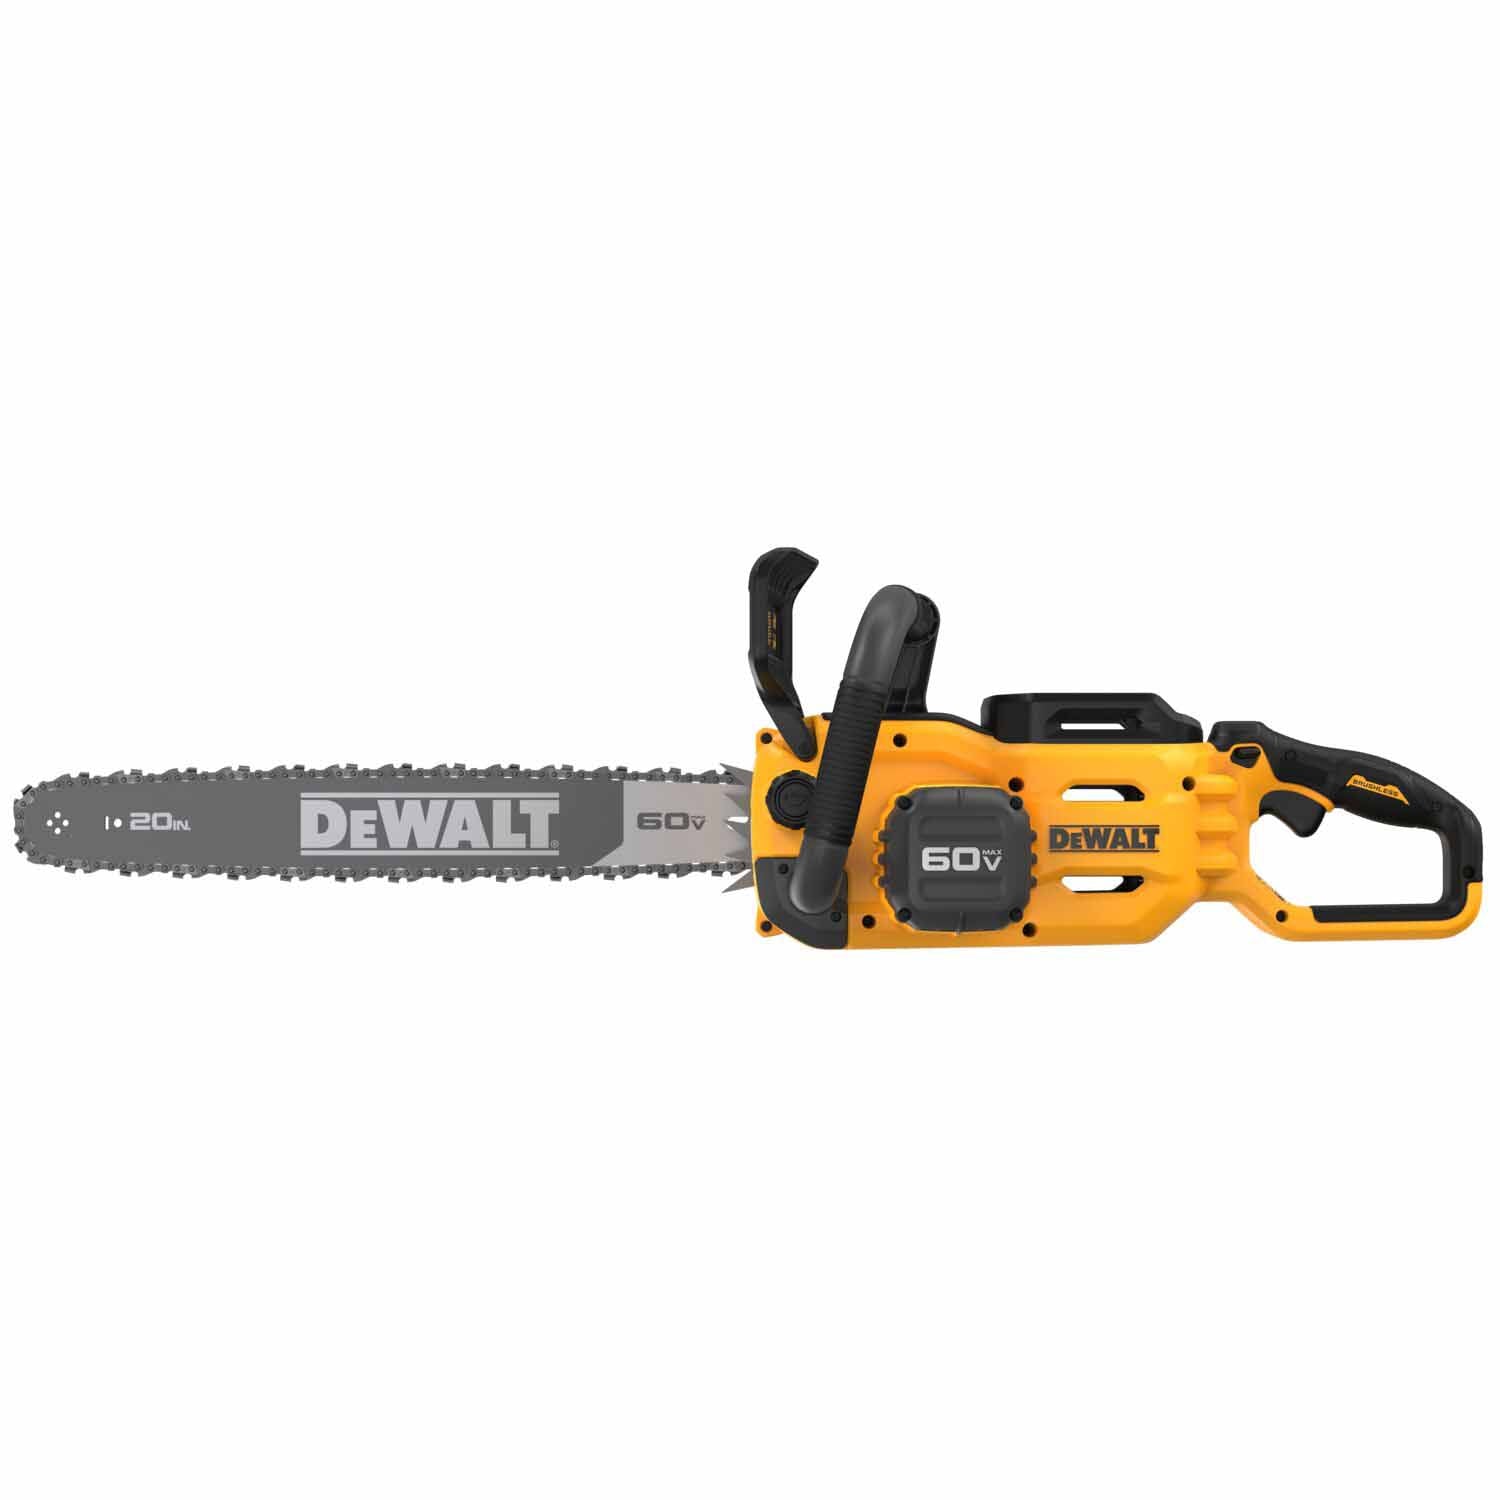 DeWalt DCCS677B 60V MAX* Brushless Cordless 20" Chainsaw (Tool Only)